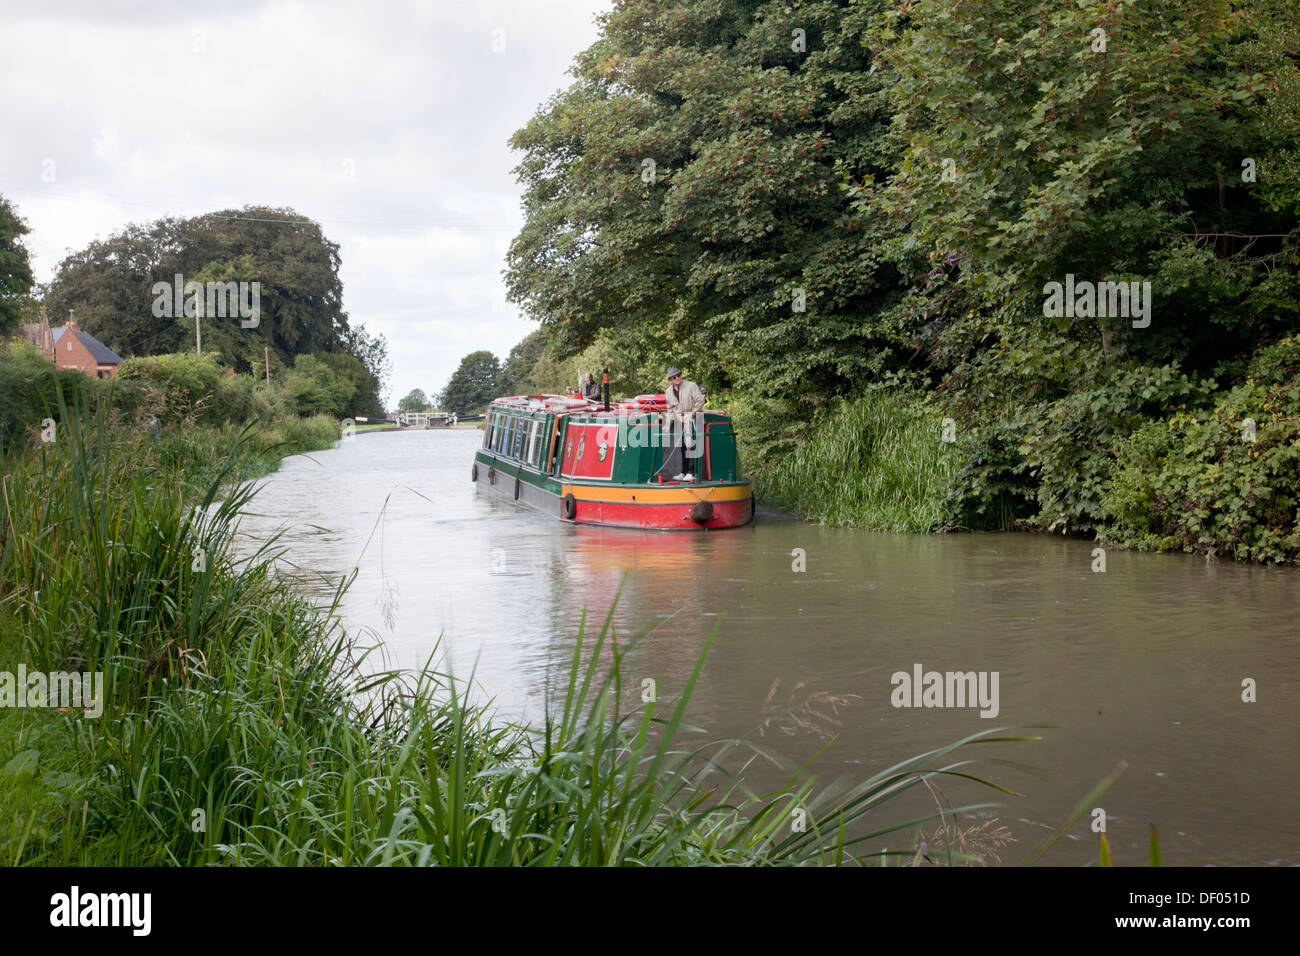 Canal boat on The Kennet and Avon Canal, Devizes, Wiltshire, England, Uk Stock Photo